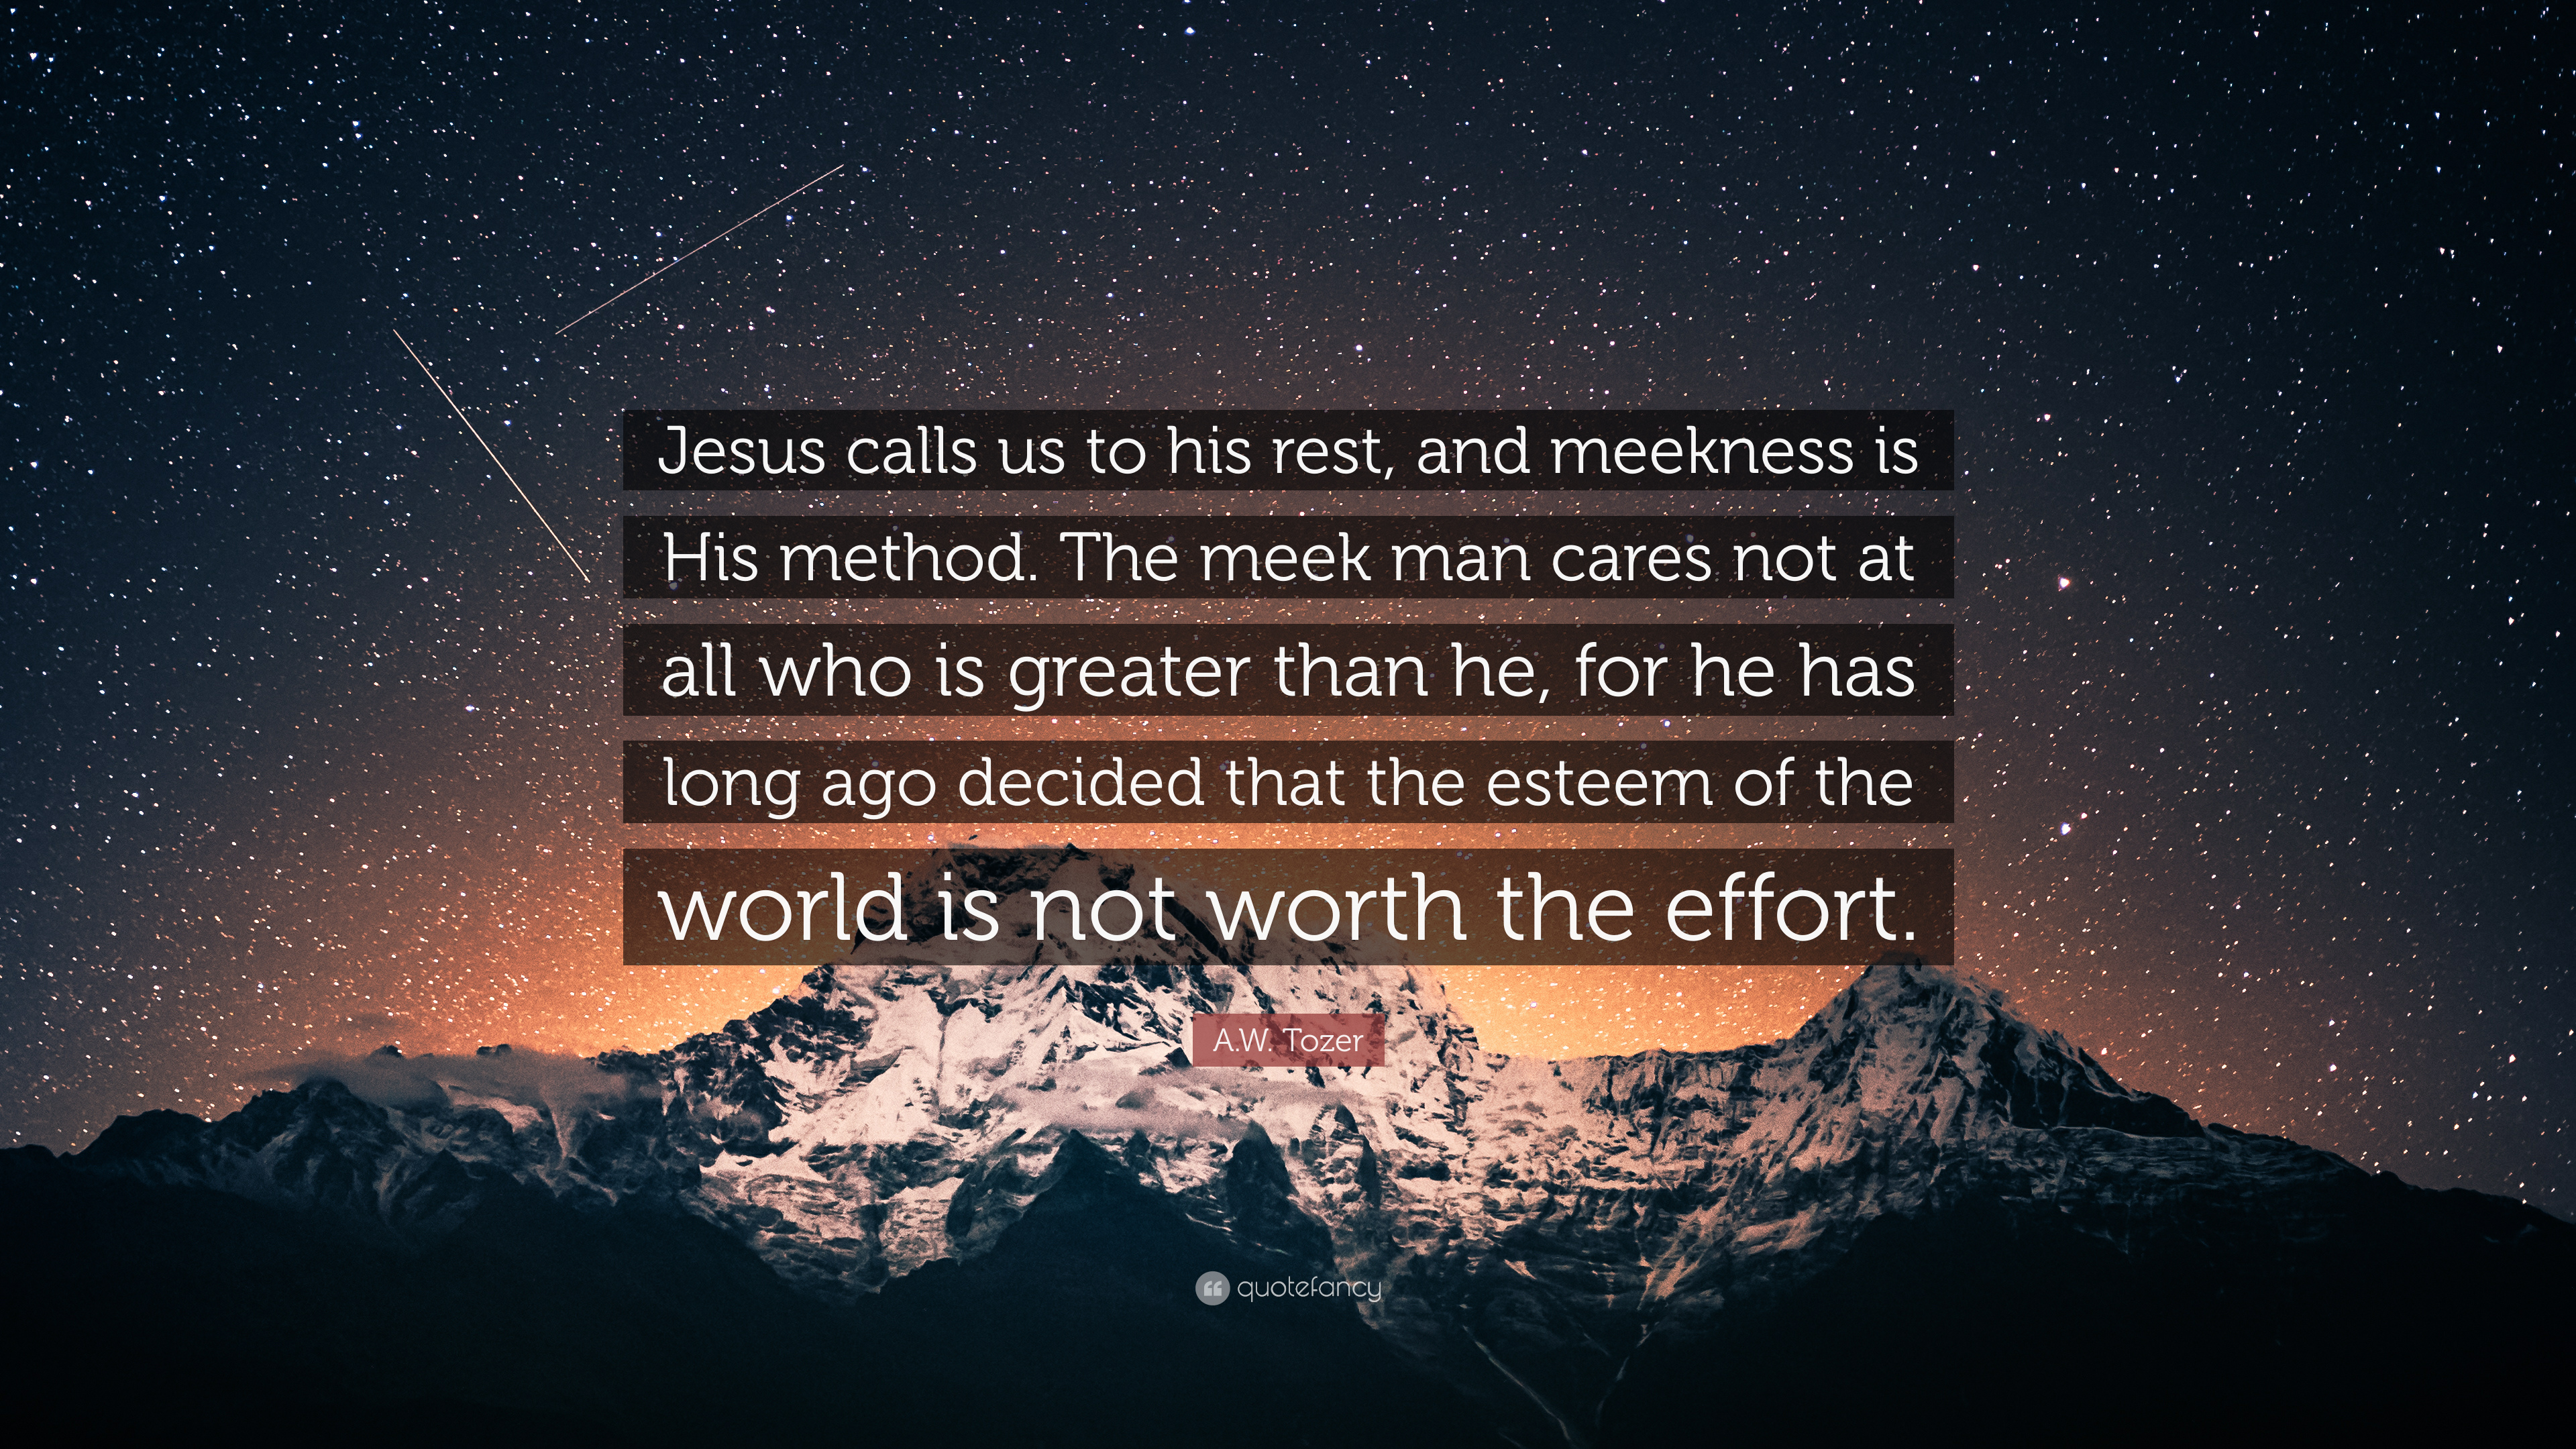 Aw tozer quote âjesus calls us to his rest and meekness is his method the meek man cares not at all who is greater than he for he hasâ